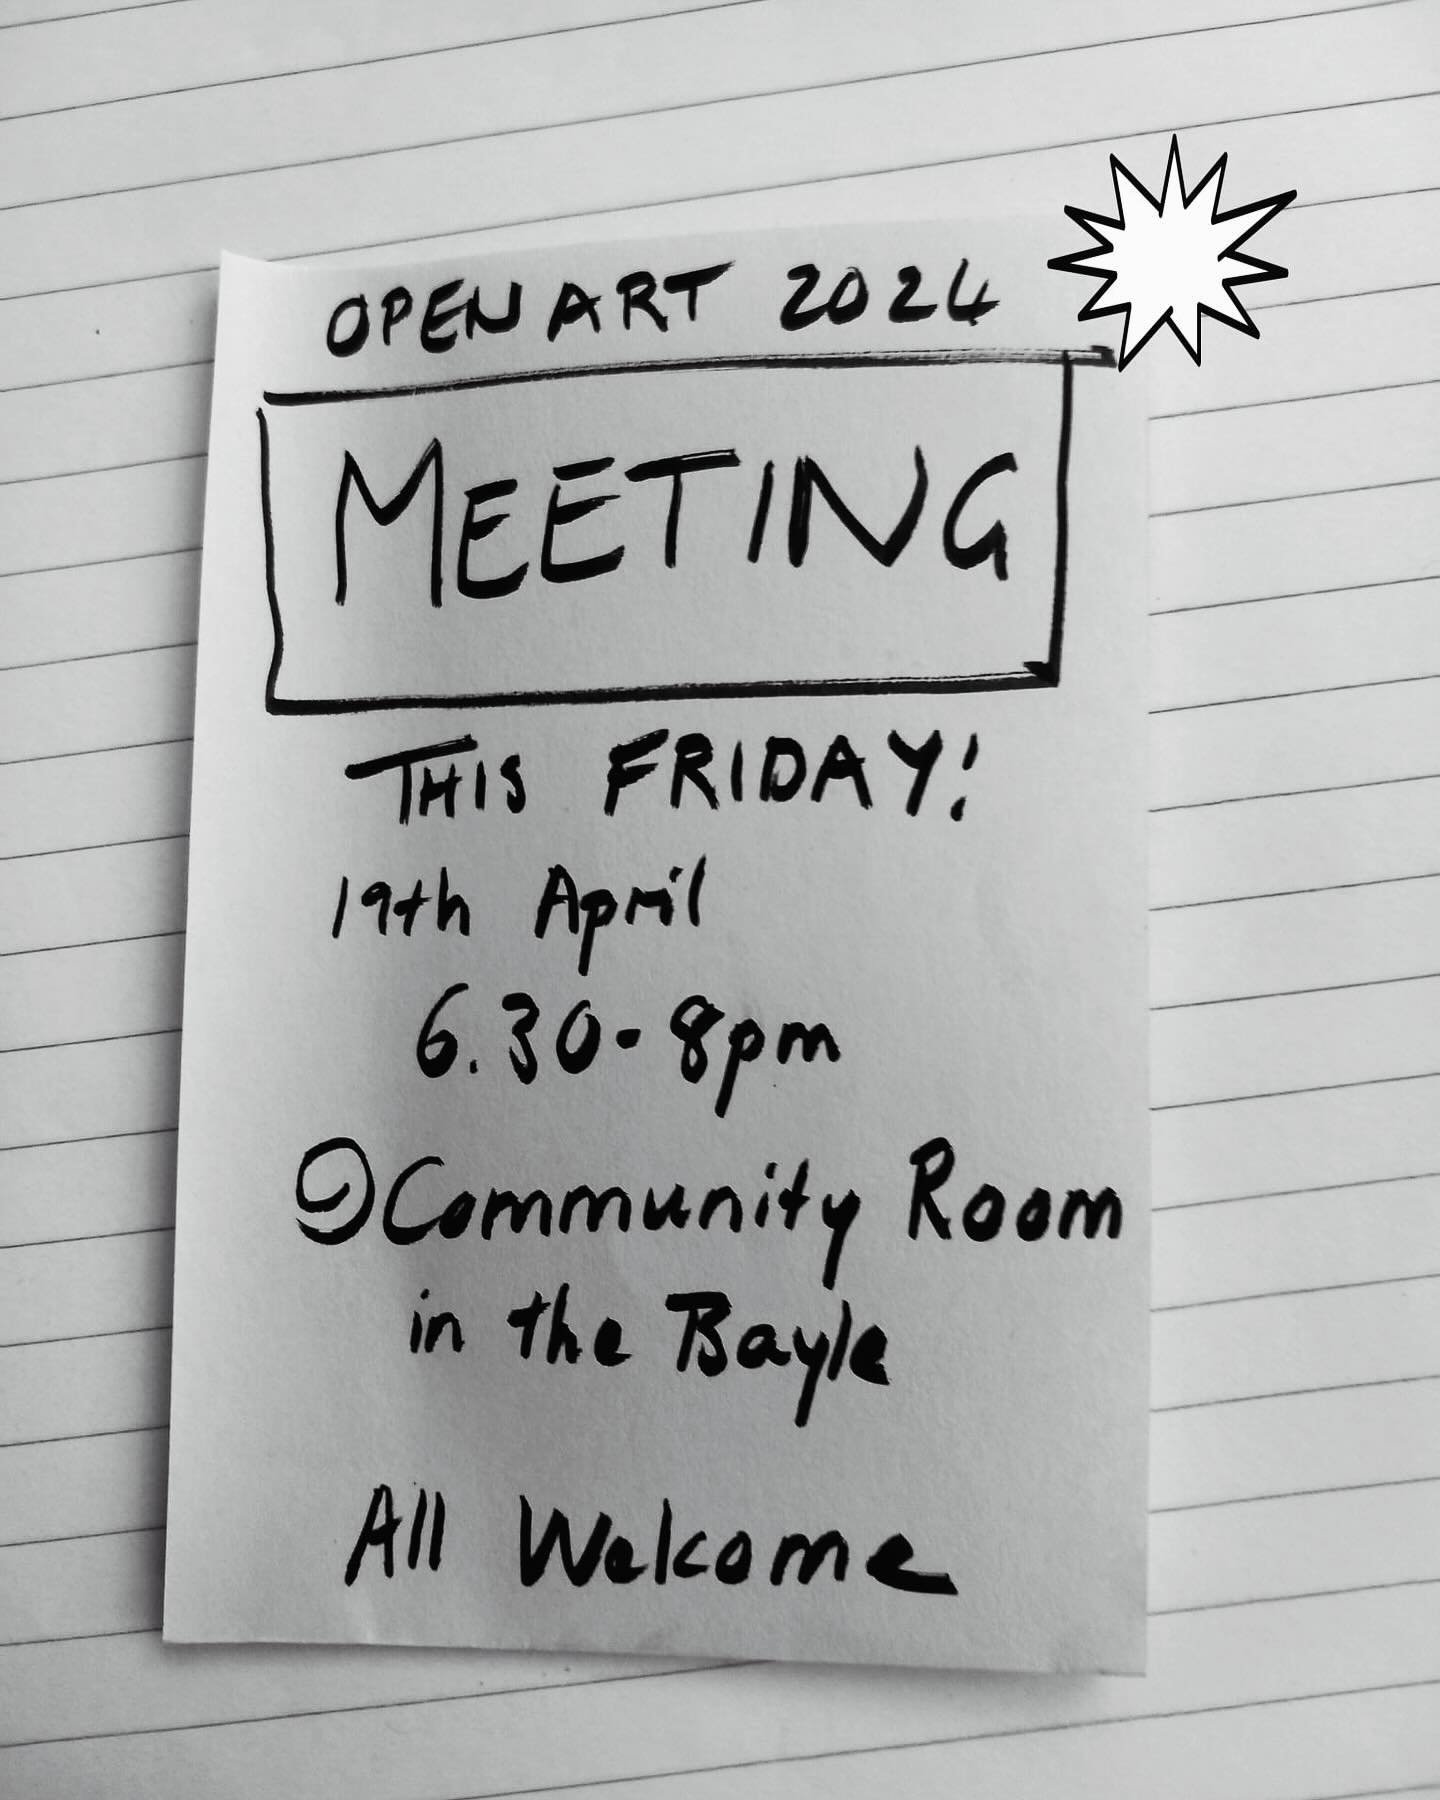 🚨THIS FRIDAY🚨 Community Meeting to discuss this Septembers @openart2024folkestone festival / 6.30-8pm

Come ready with your ideas to discuss at the Bayle Community Room. All Welcome! 

#folkestone #folkestoneartists #openart #openstudios #artcommun